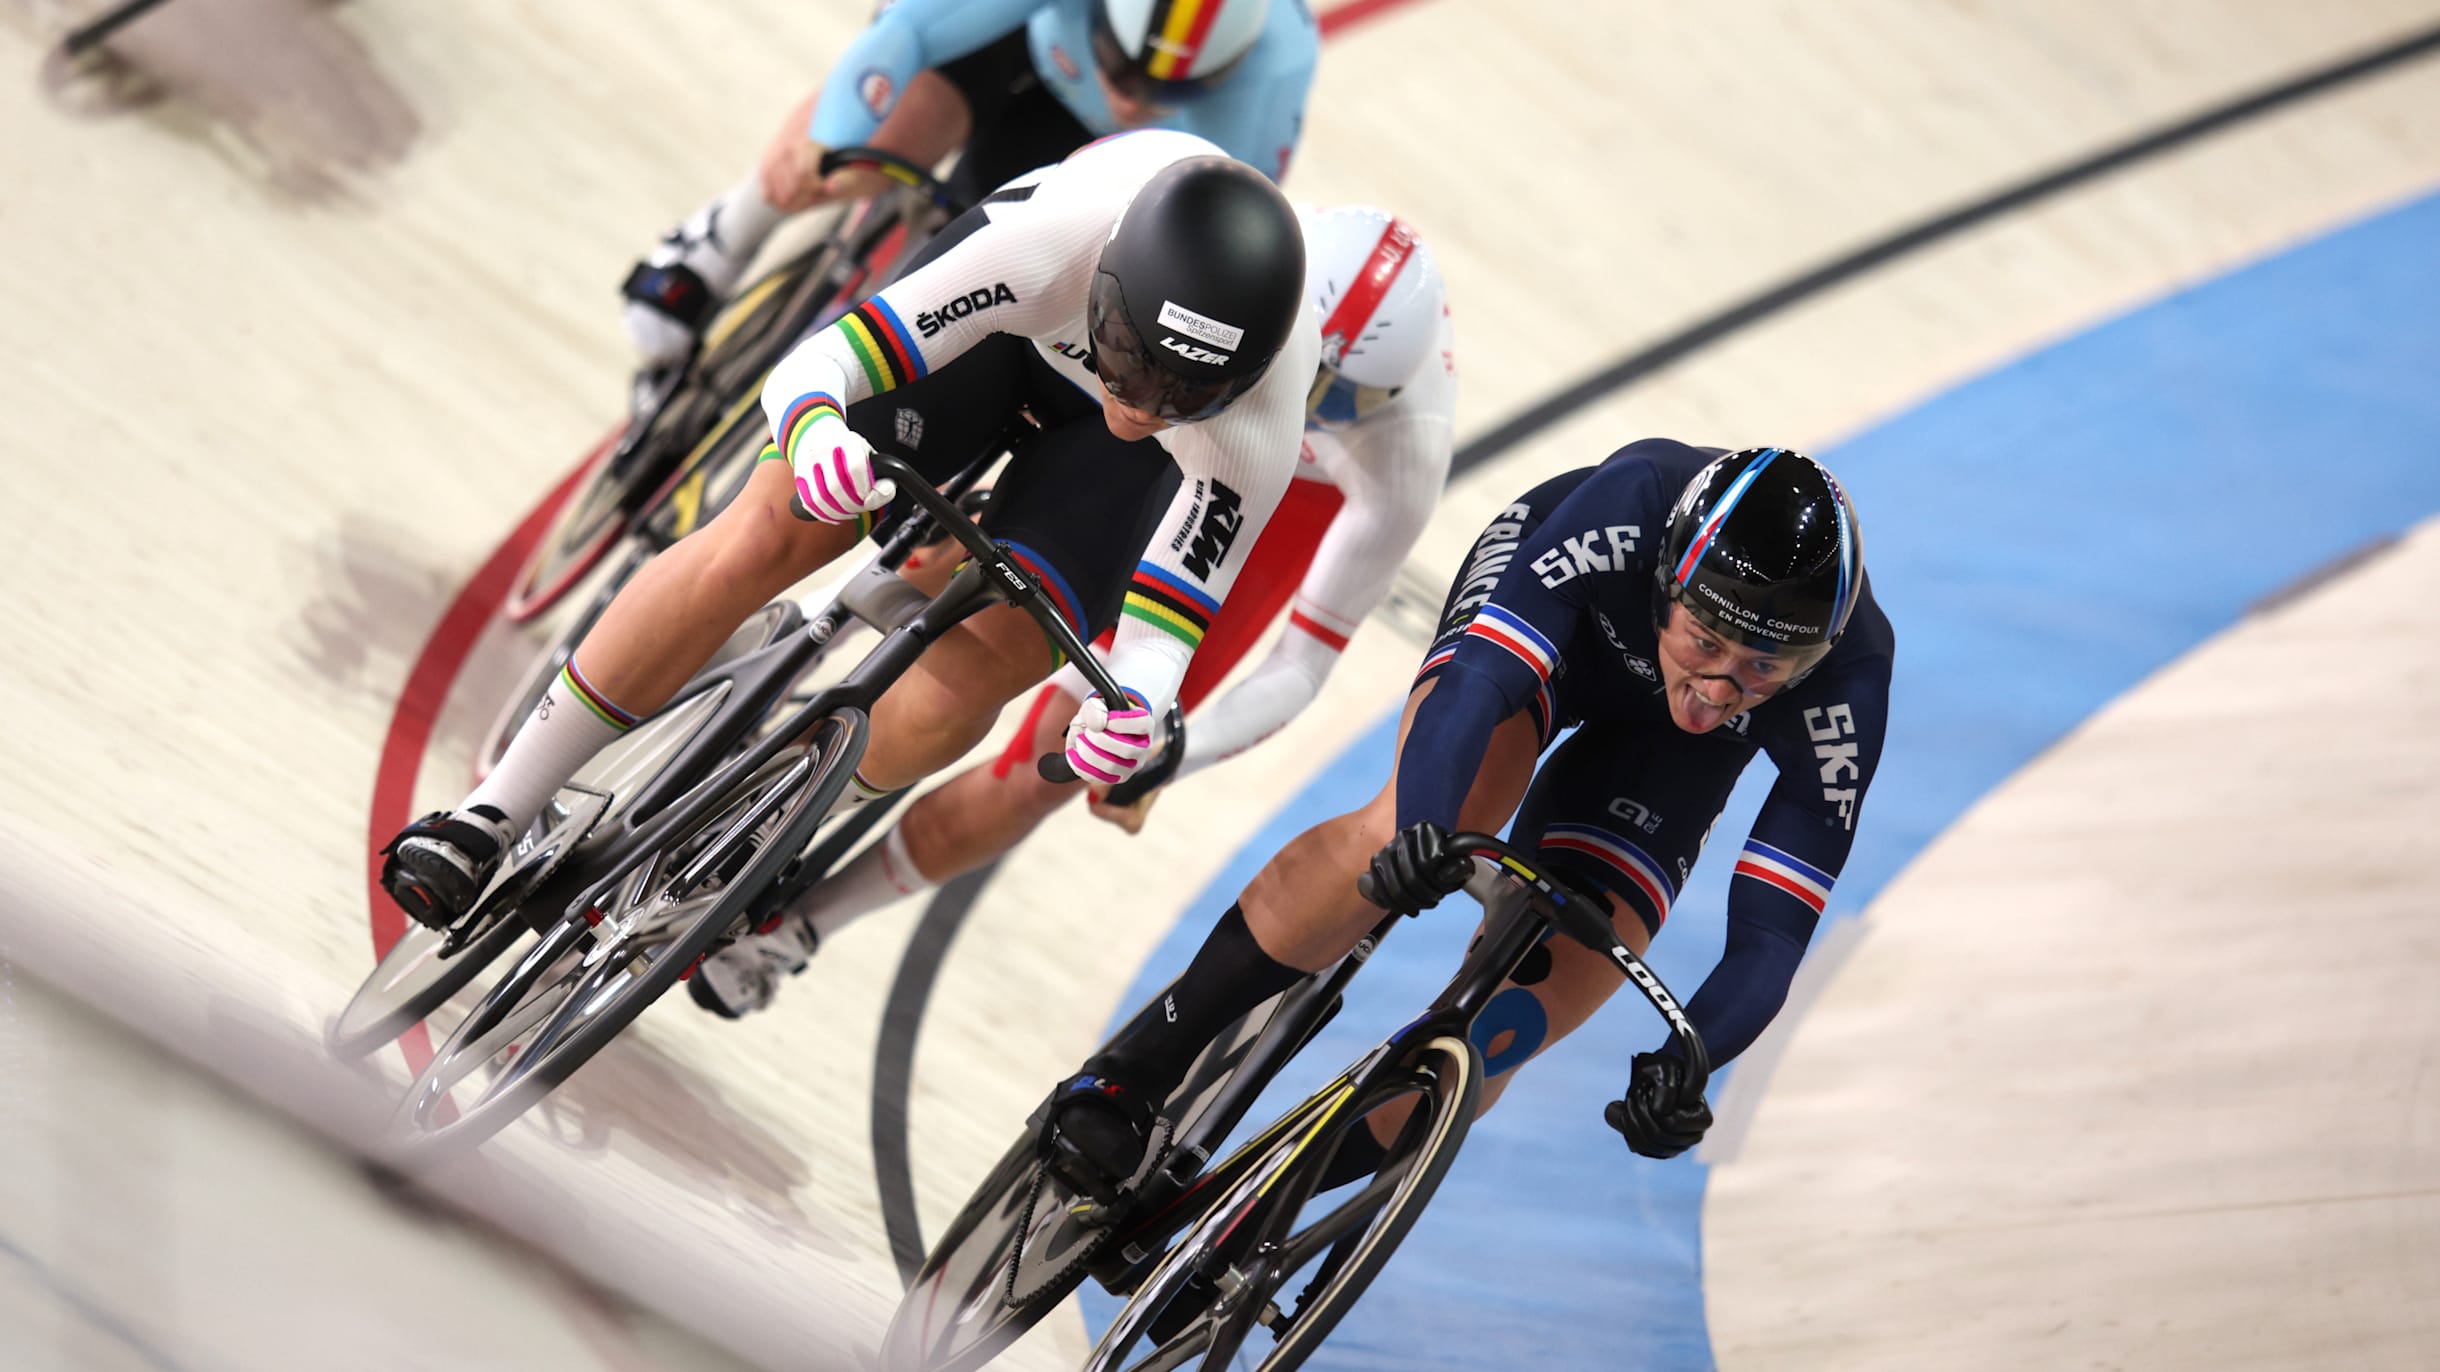 2022 UCI Track Cycling World Championships in Saint-Quentin-en-Yvelines, France featuring Laura Kenny